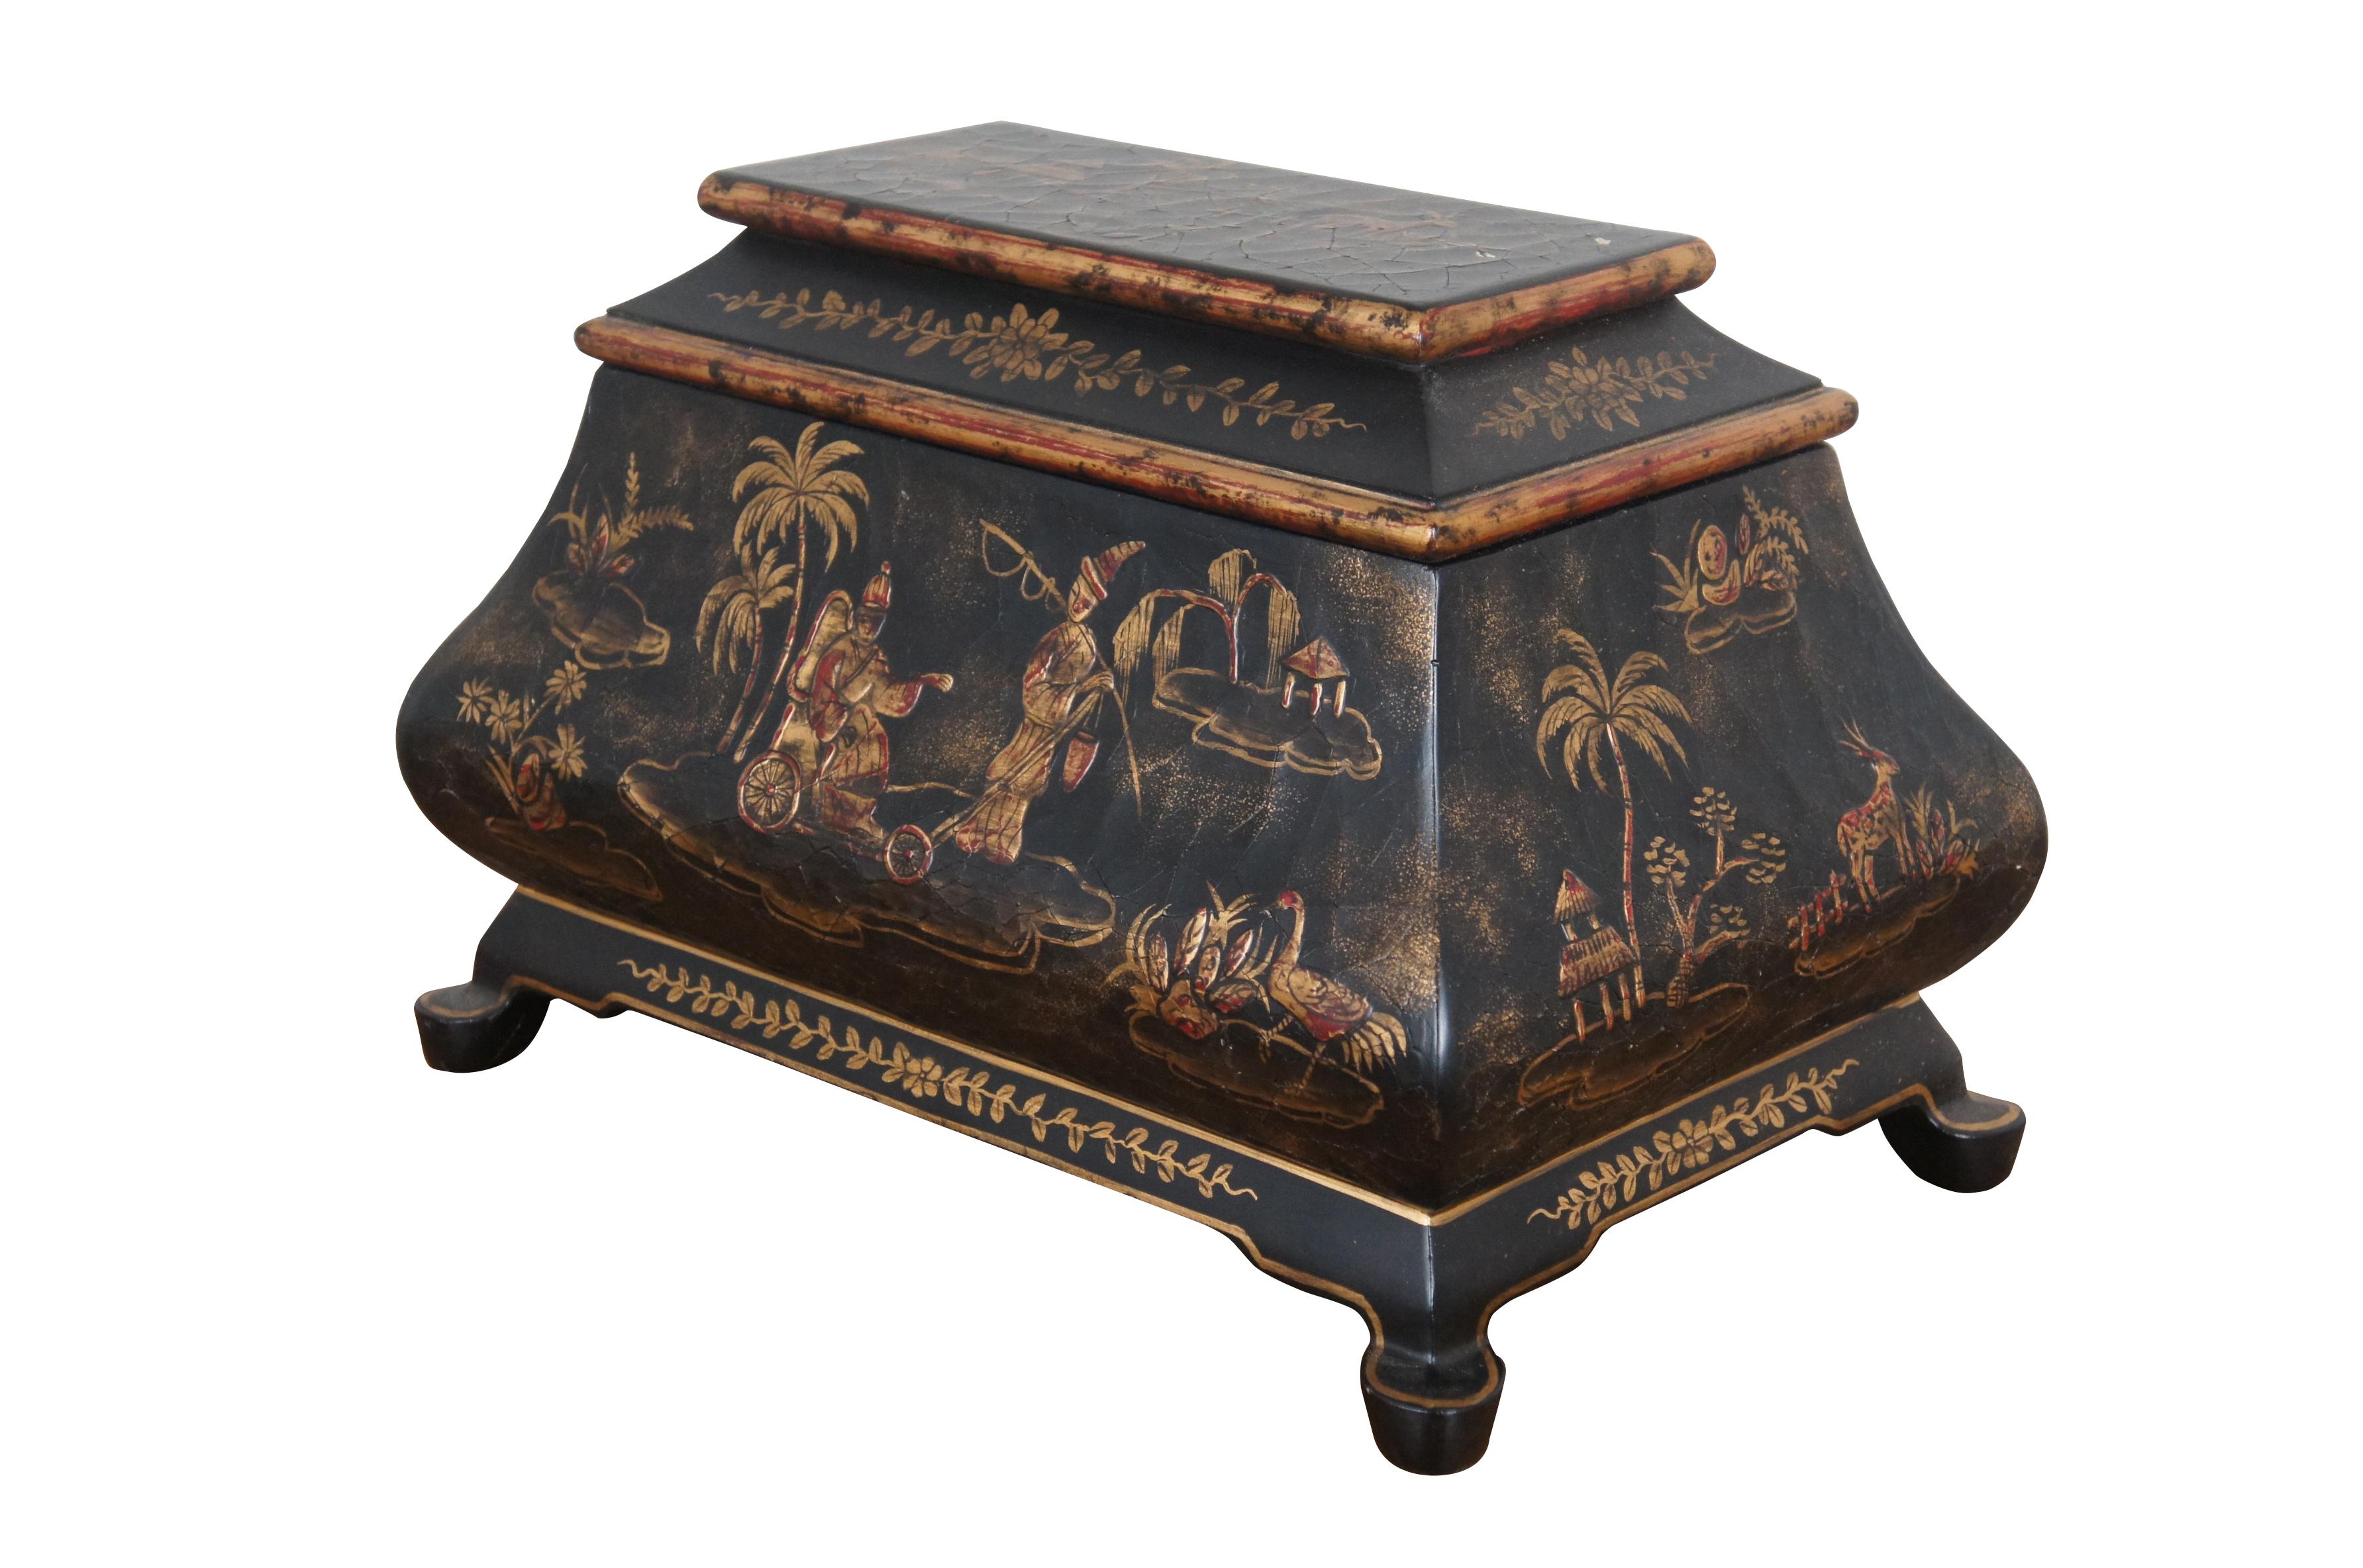 Late 20th century Maitland Smith black and gold lacquer Chinoiserie trinket / keepsake box, decorated with island landscapes featuring huts, animals, and a pair of figures. 1143-317. Made in China.

Dimensions:
15